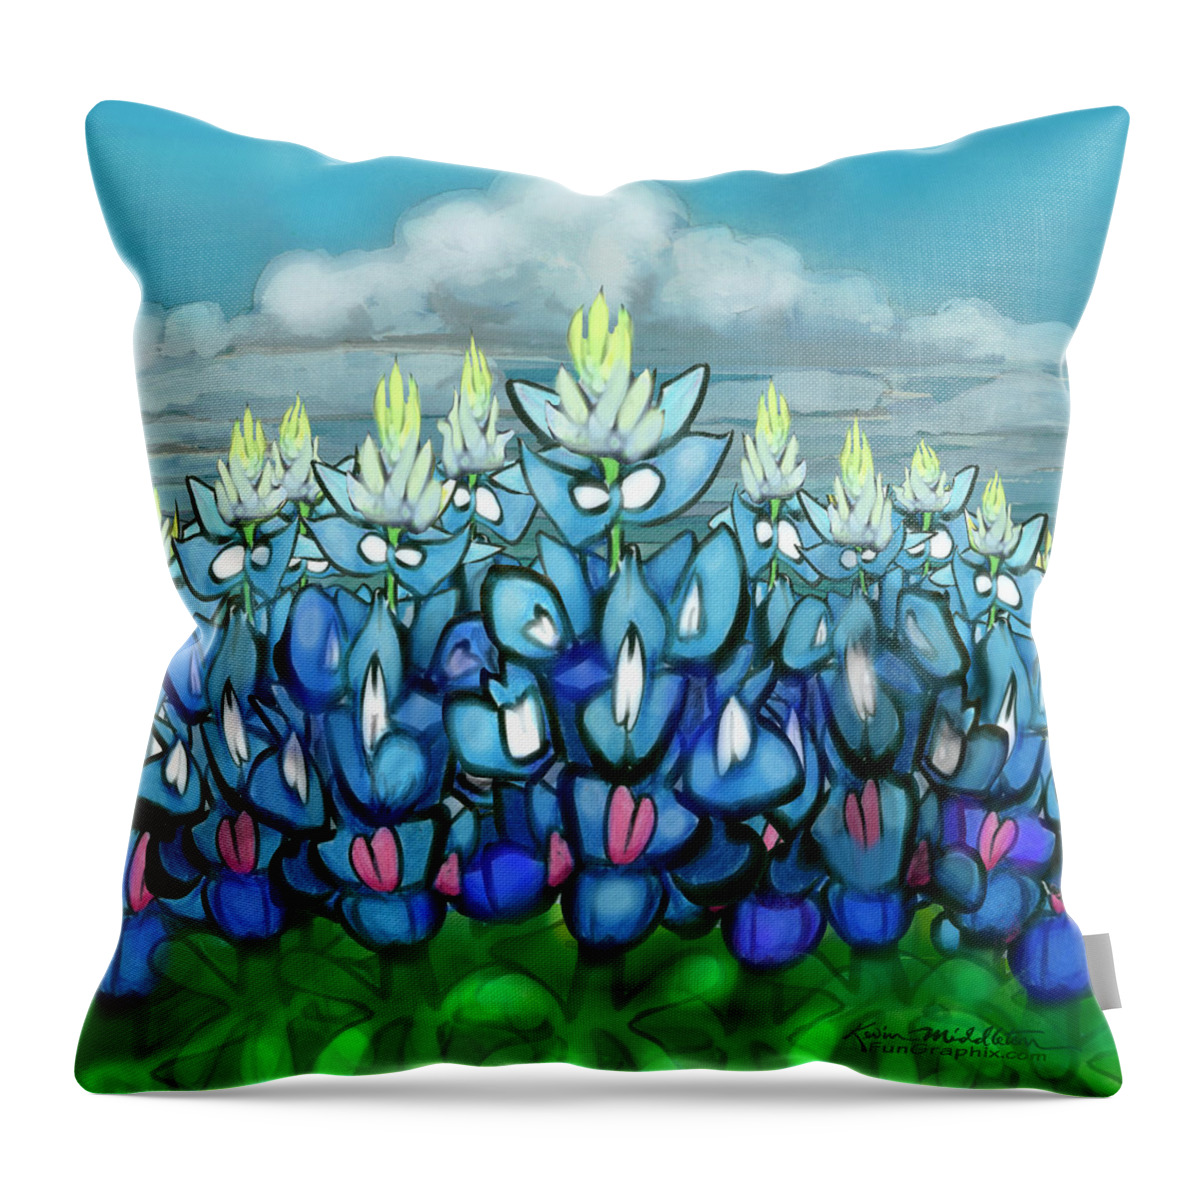 Bluebonnet Throw Pillow featuring the digital art Bluebonnet Country Scene by Kevin Middleton